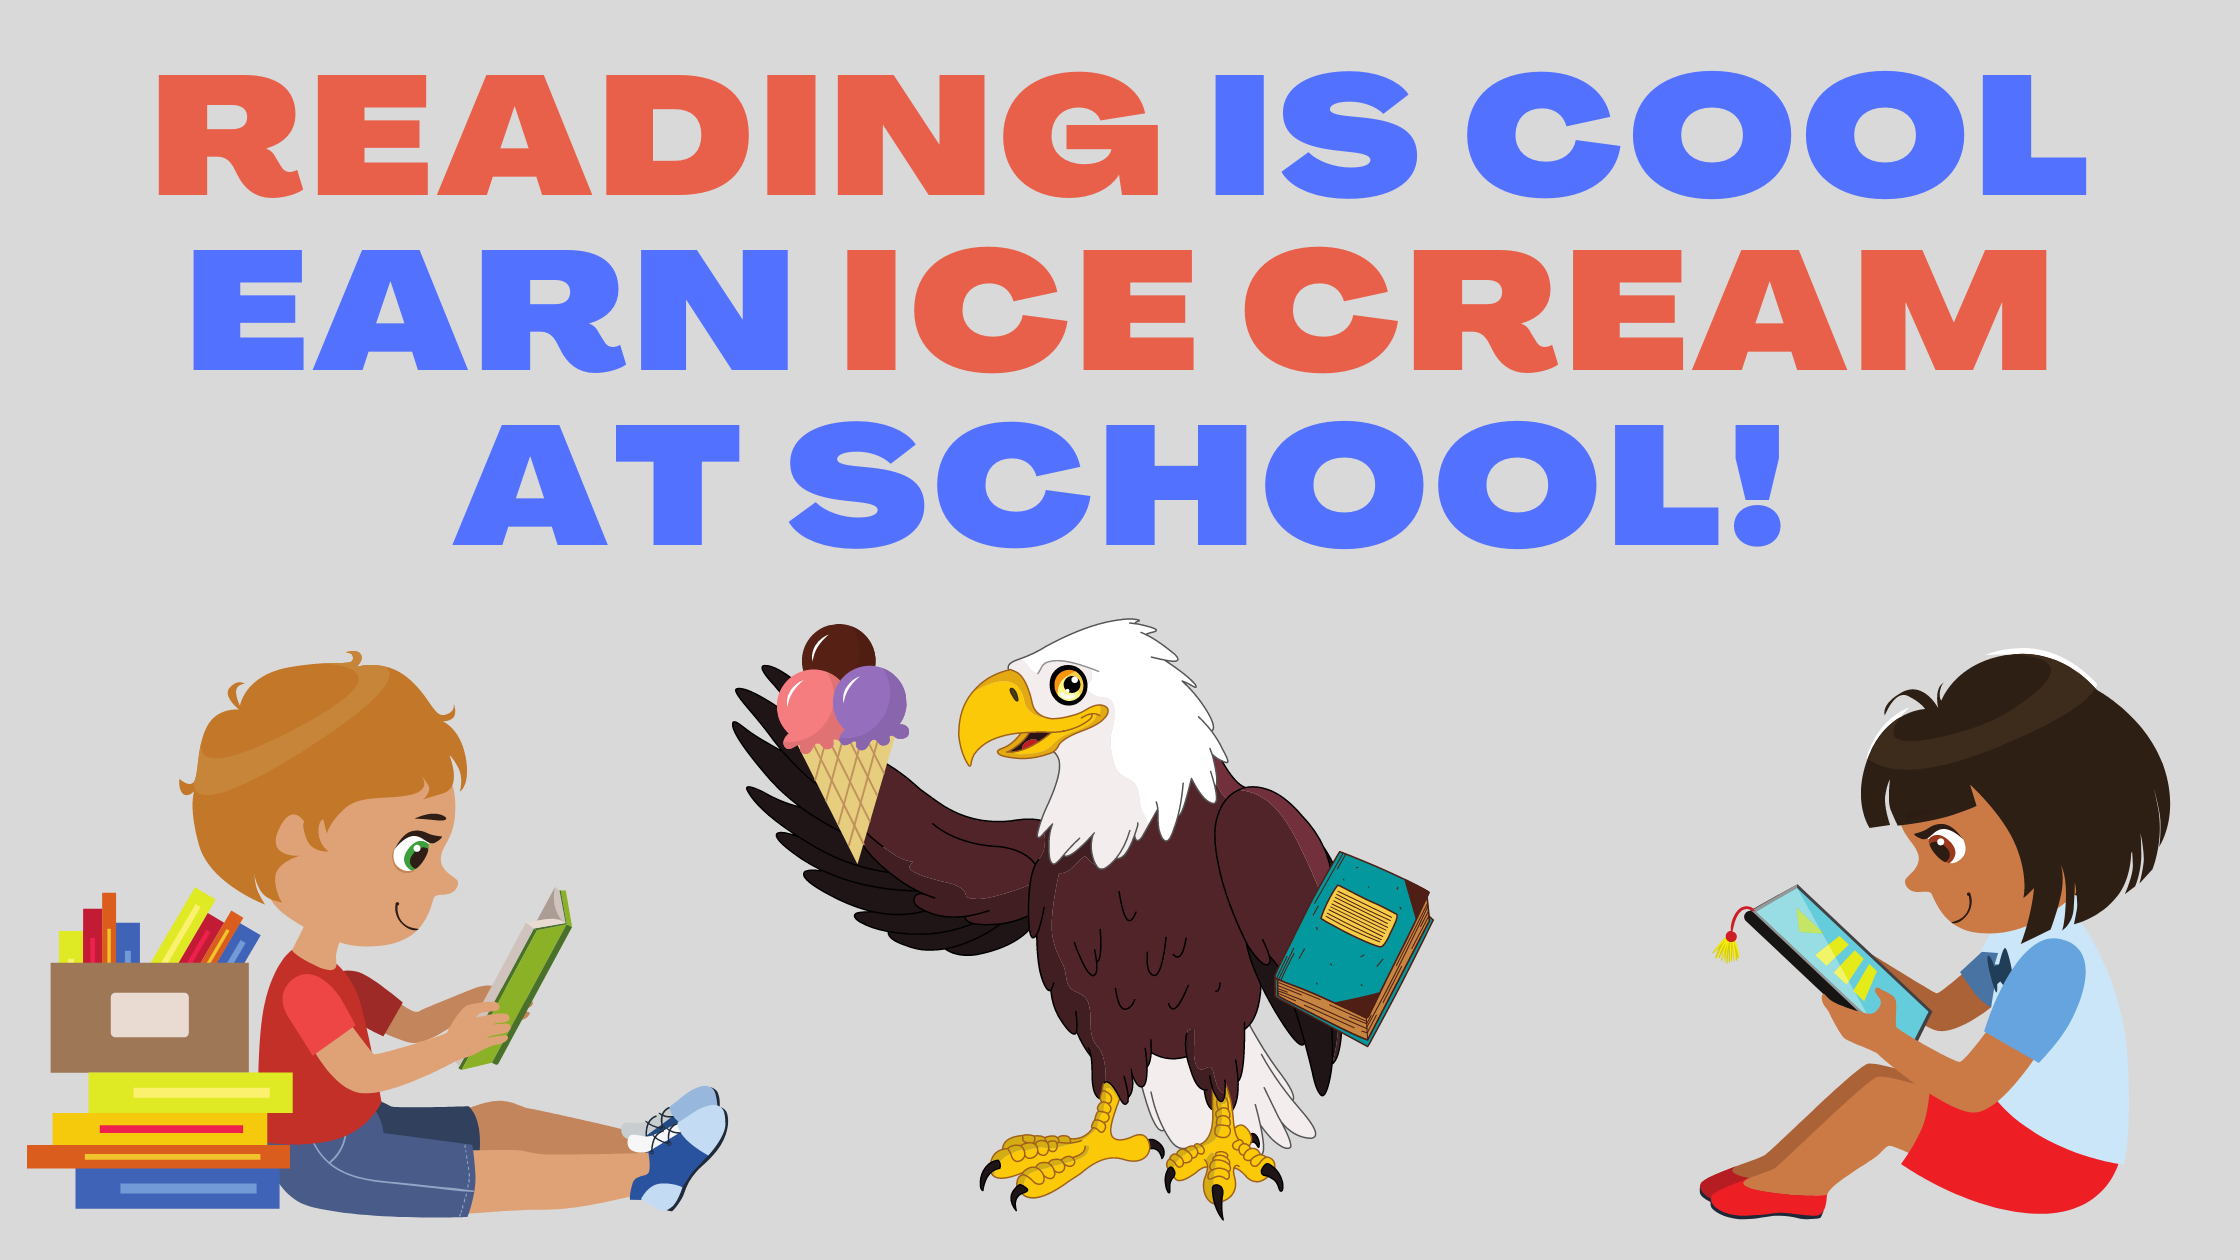 Reading is Cool! Earn Ice Cream at School!